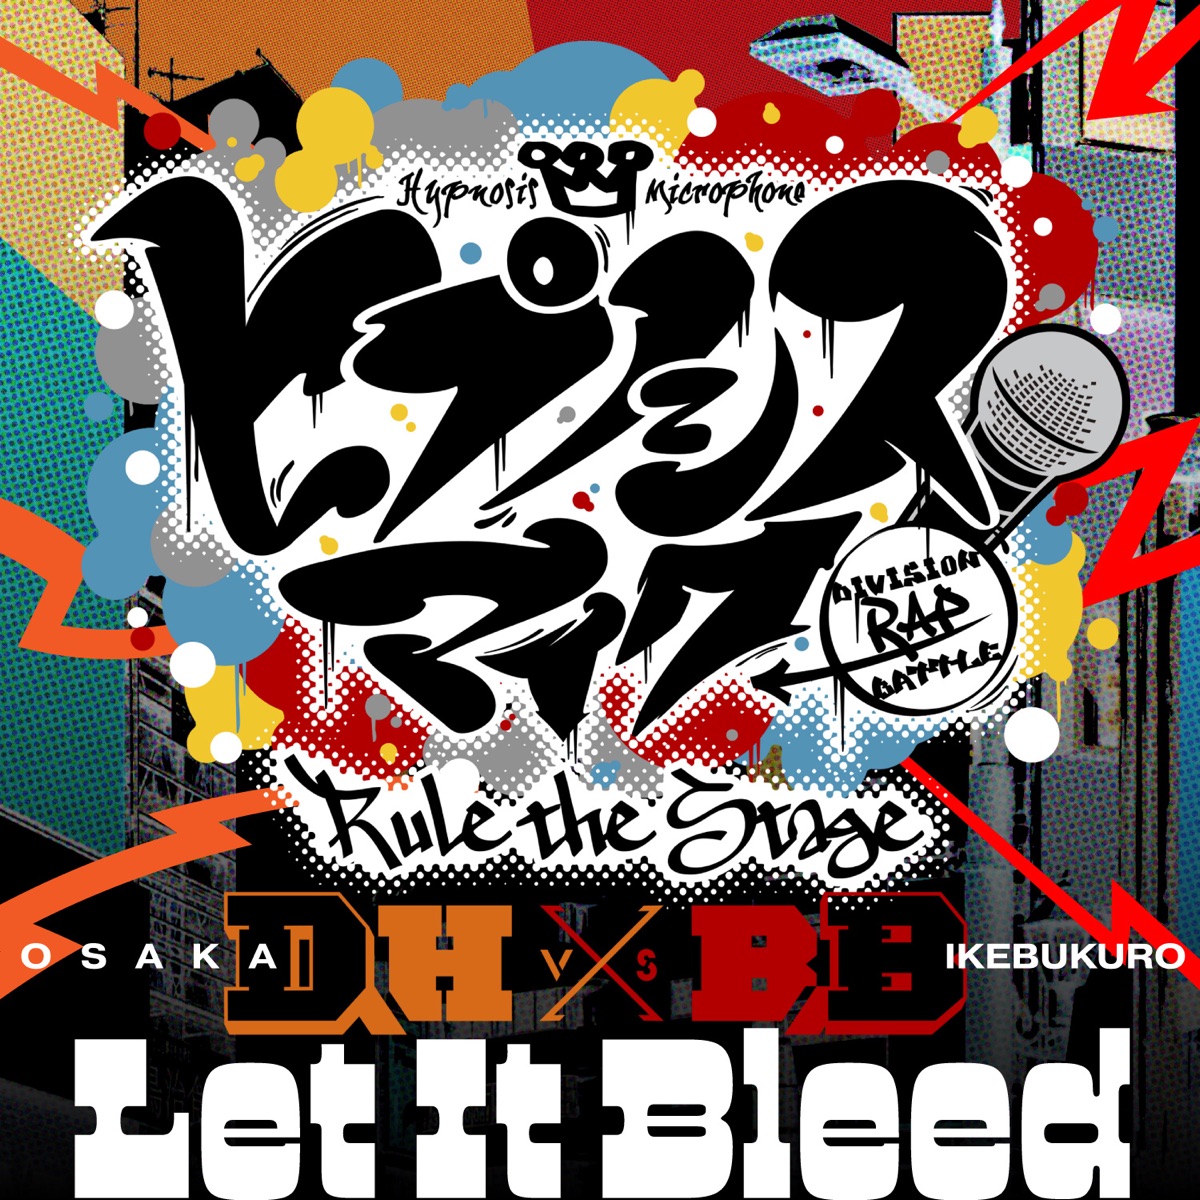 Cover art for『Hypnosis Mic -D.R.B- Rule the Stage (Dotsuitare Honpo・Buster Bros!!!) - Let It Bleed』from the release『Let It Bleed』